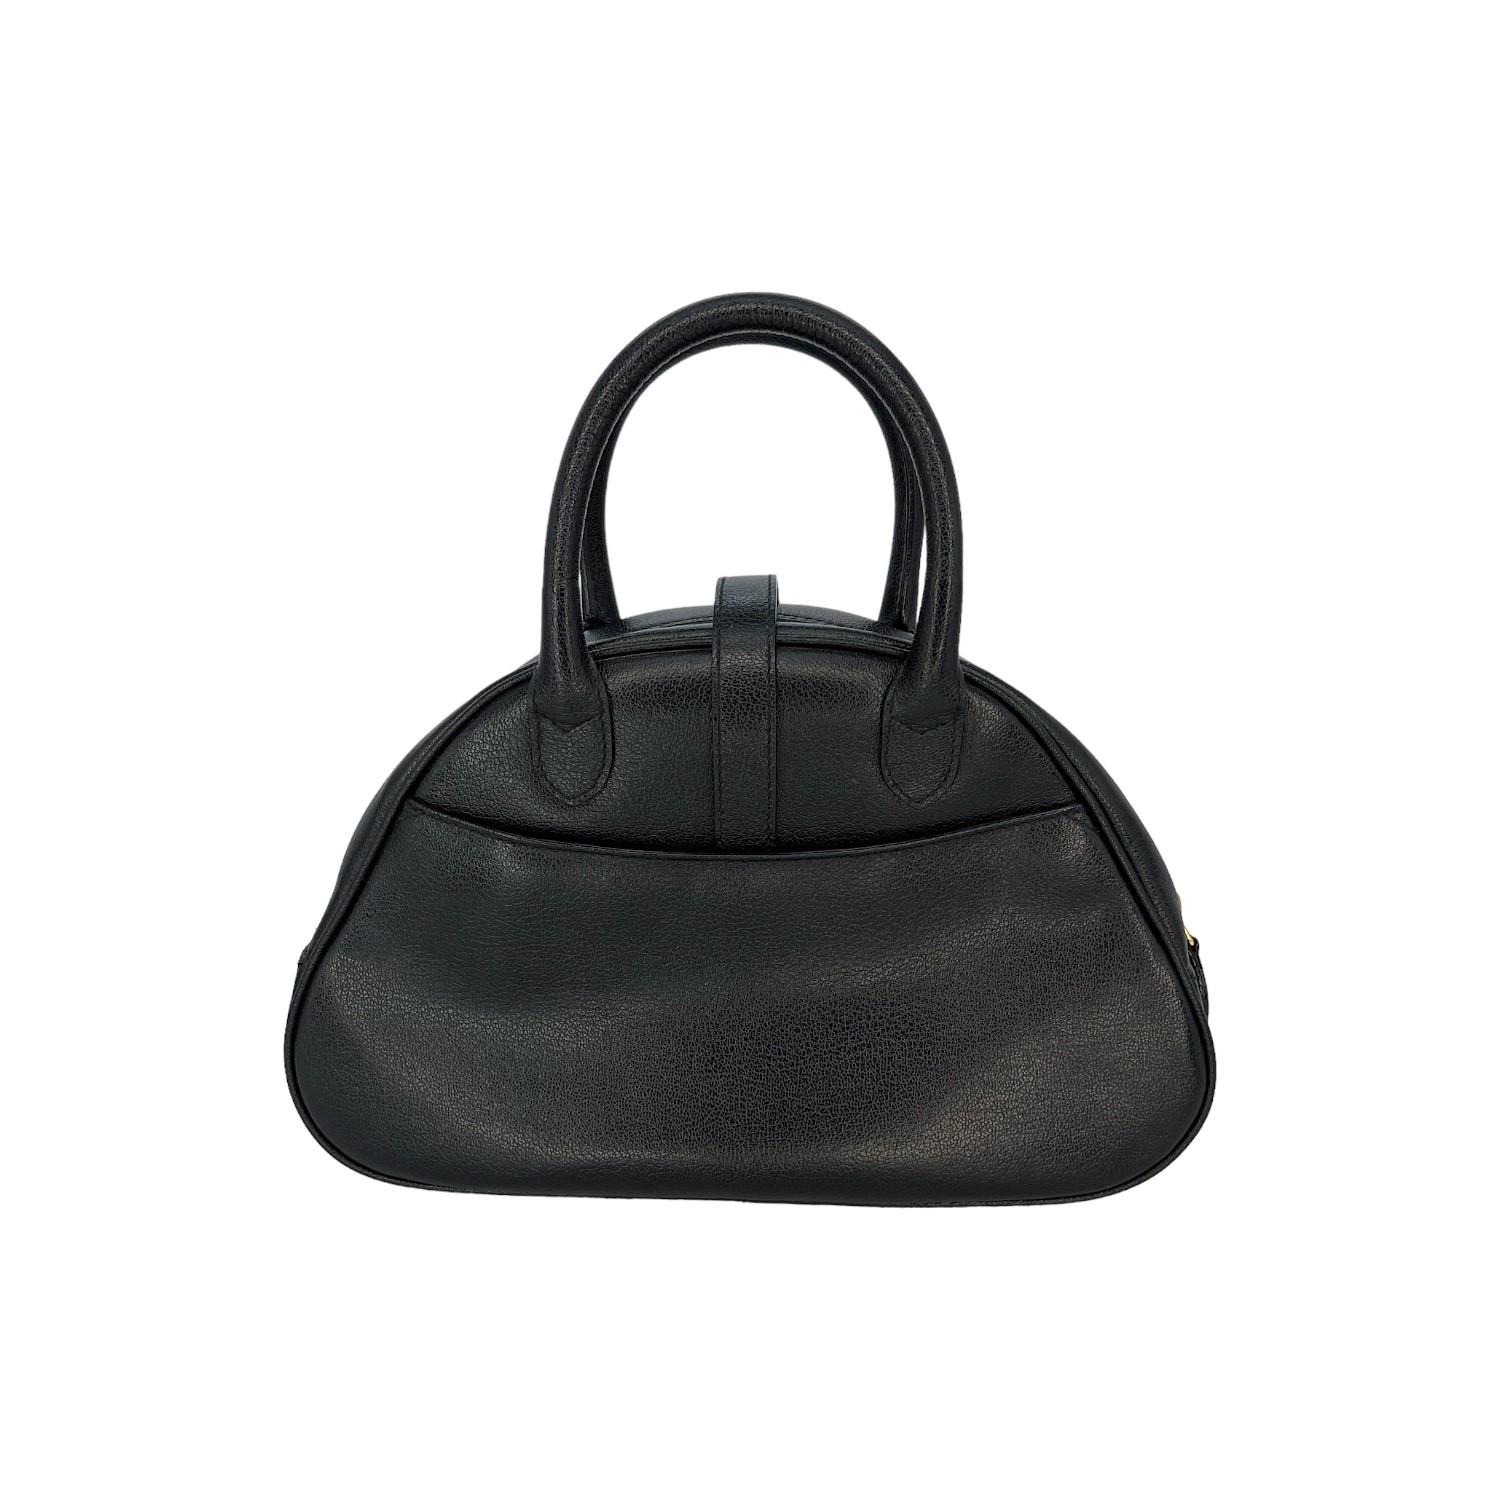 This Christian Dior Double Saddle Bowler Bag was made in Italy and it is finely crafted of a black calfskin leather exterior with gold-tone hardware features such as protective studs at the base and the logo. It has dual rolled leather top handles.